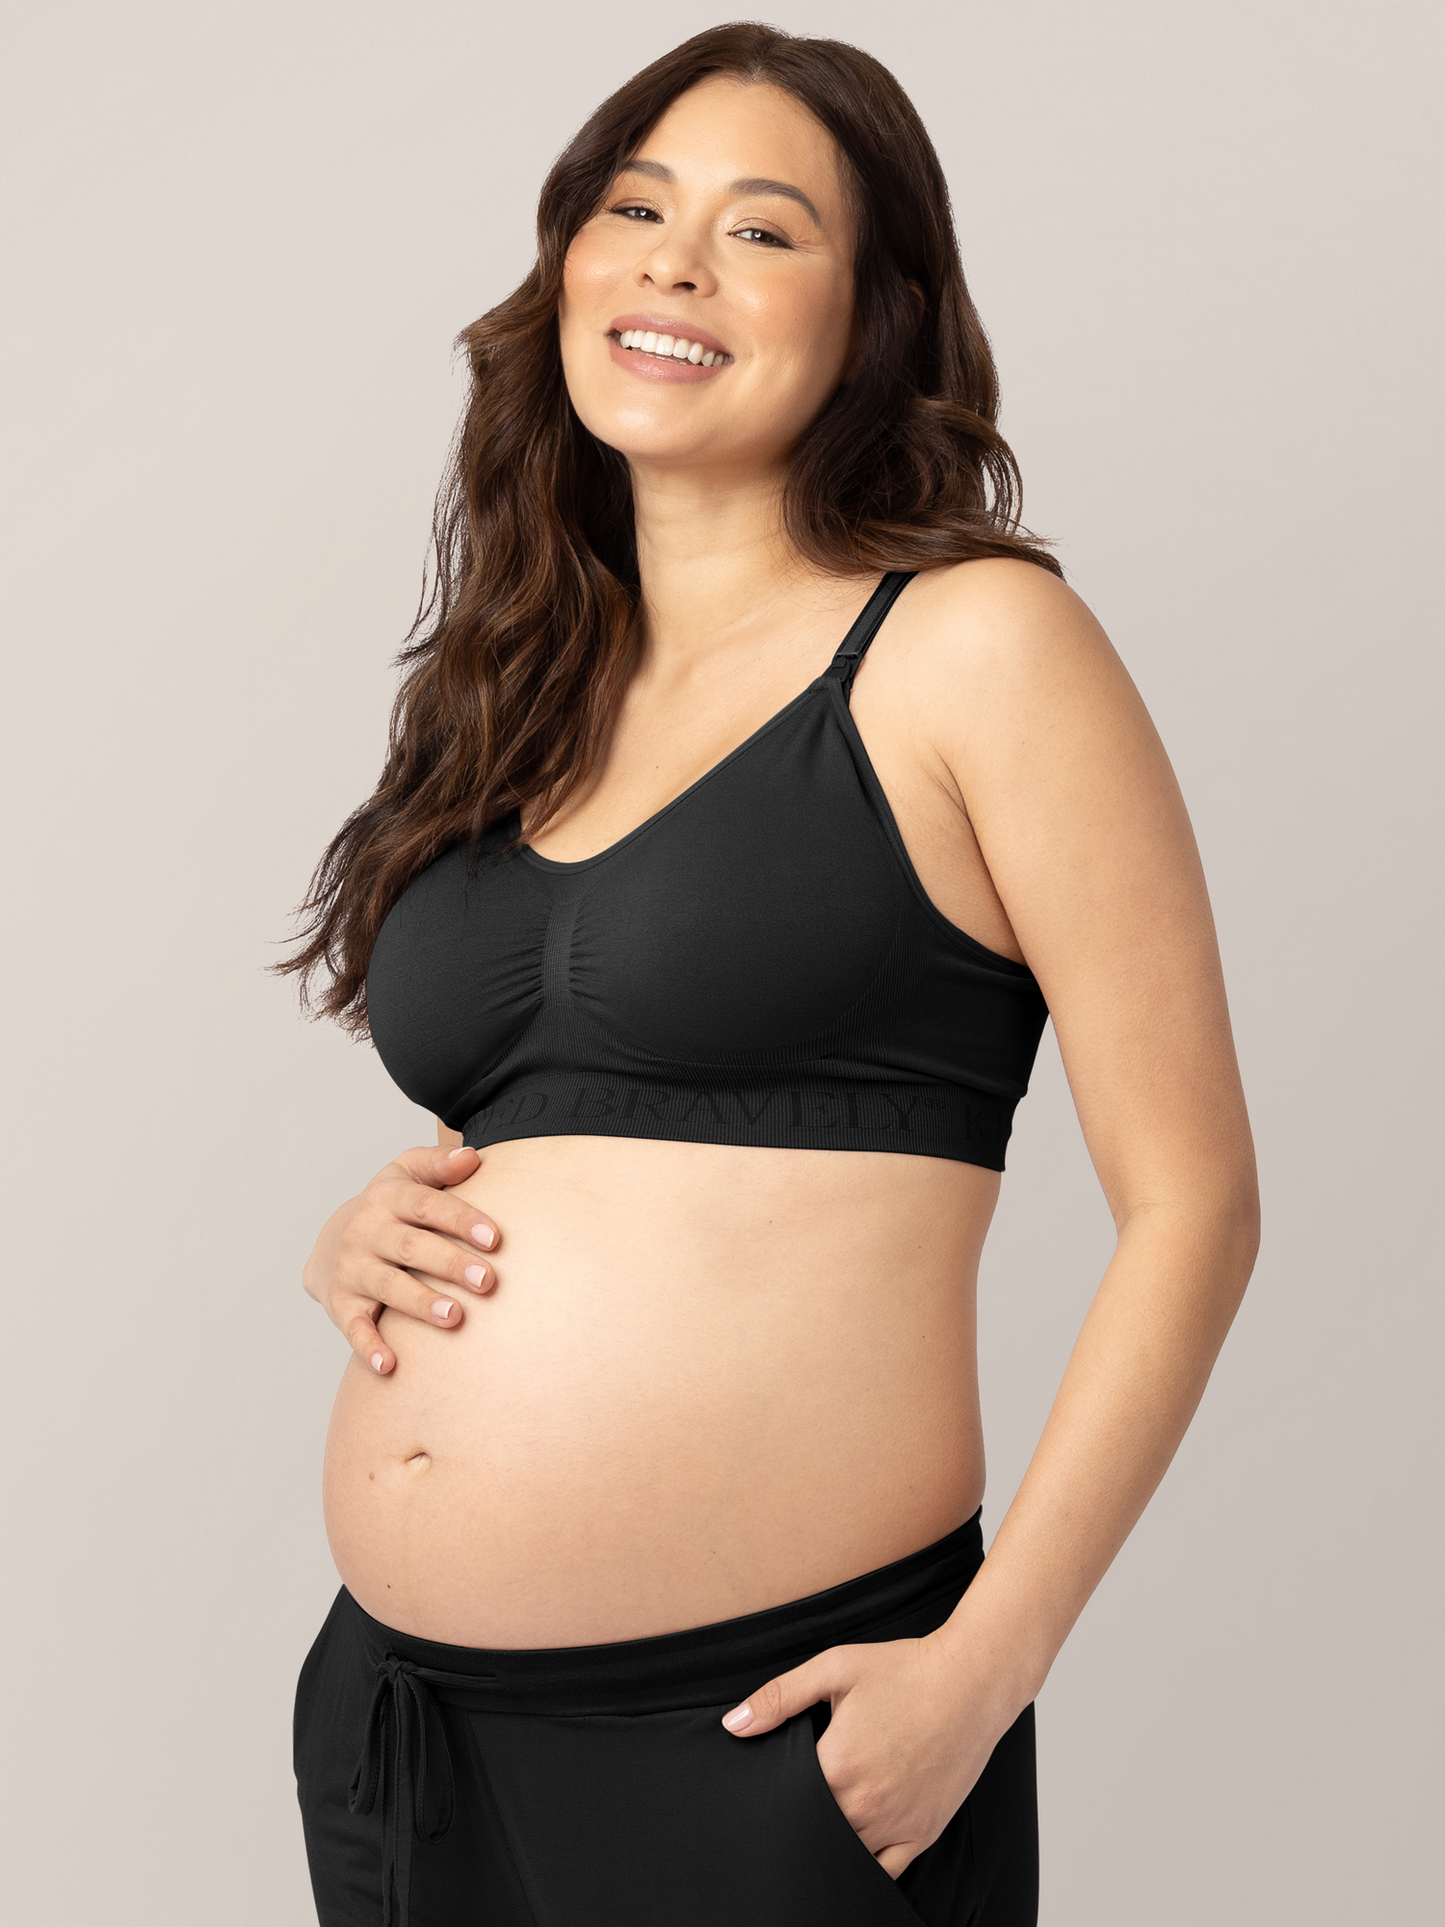 Pregnant model wearing the Simply Sublime® Nursing Bra in Black with her hand in her pocket. @model_info:Vanessa is wearing a Small.